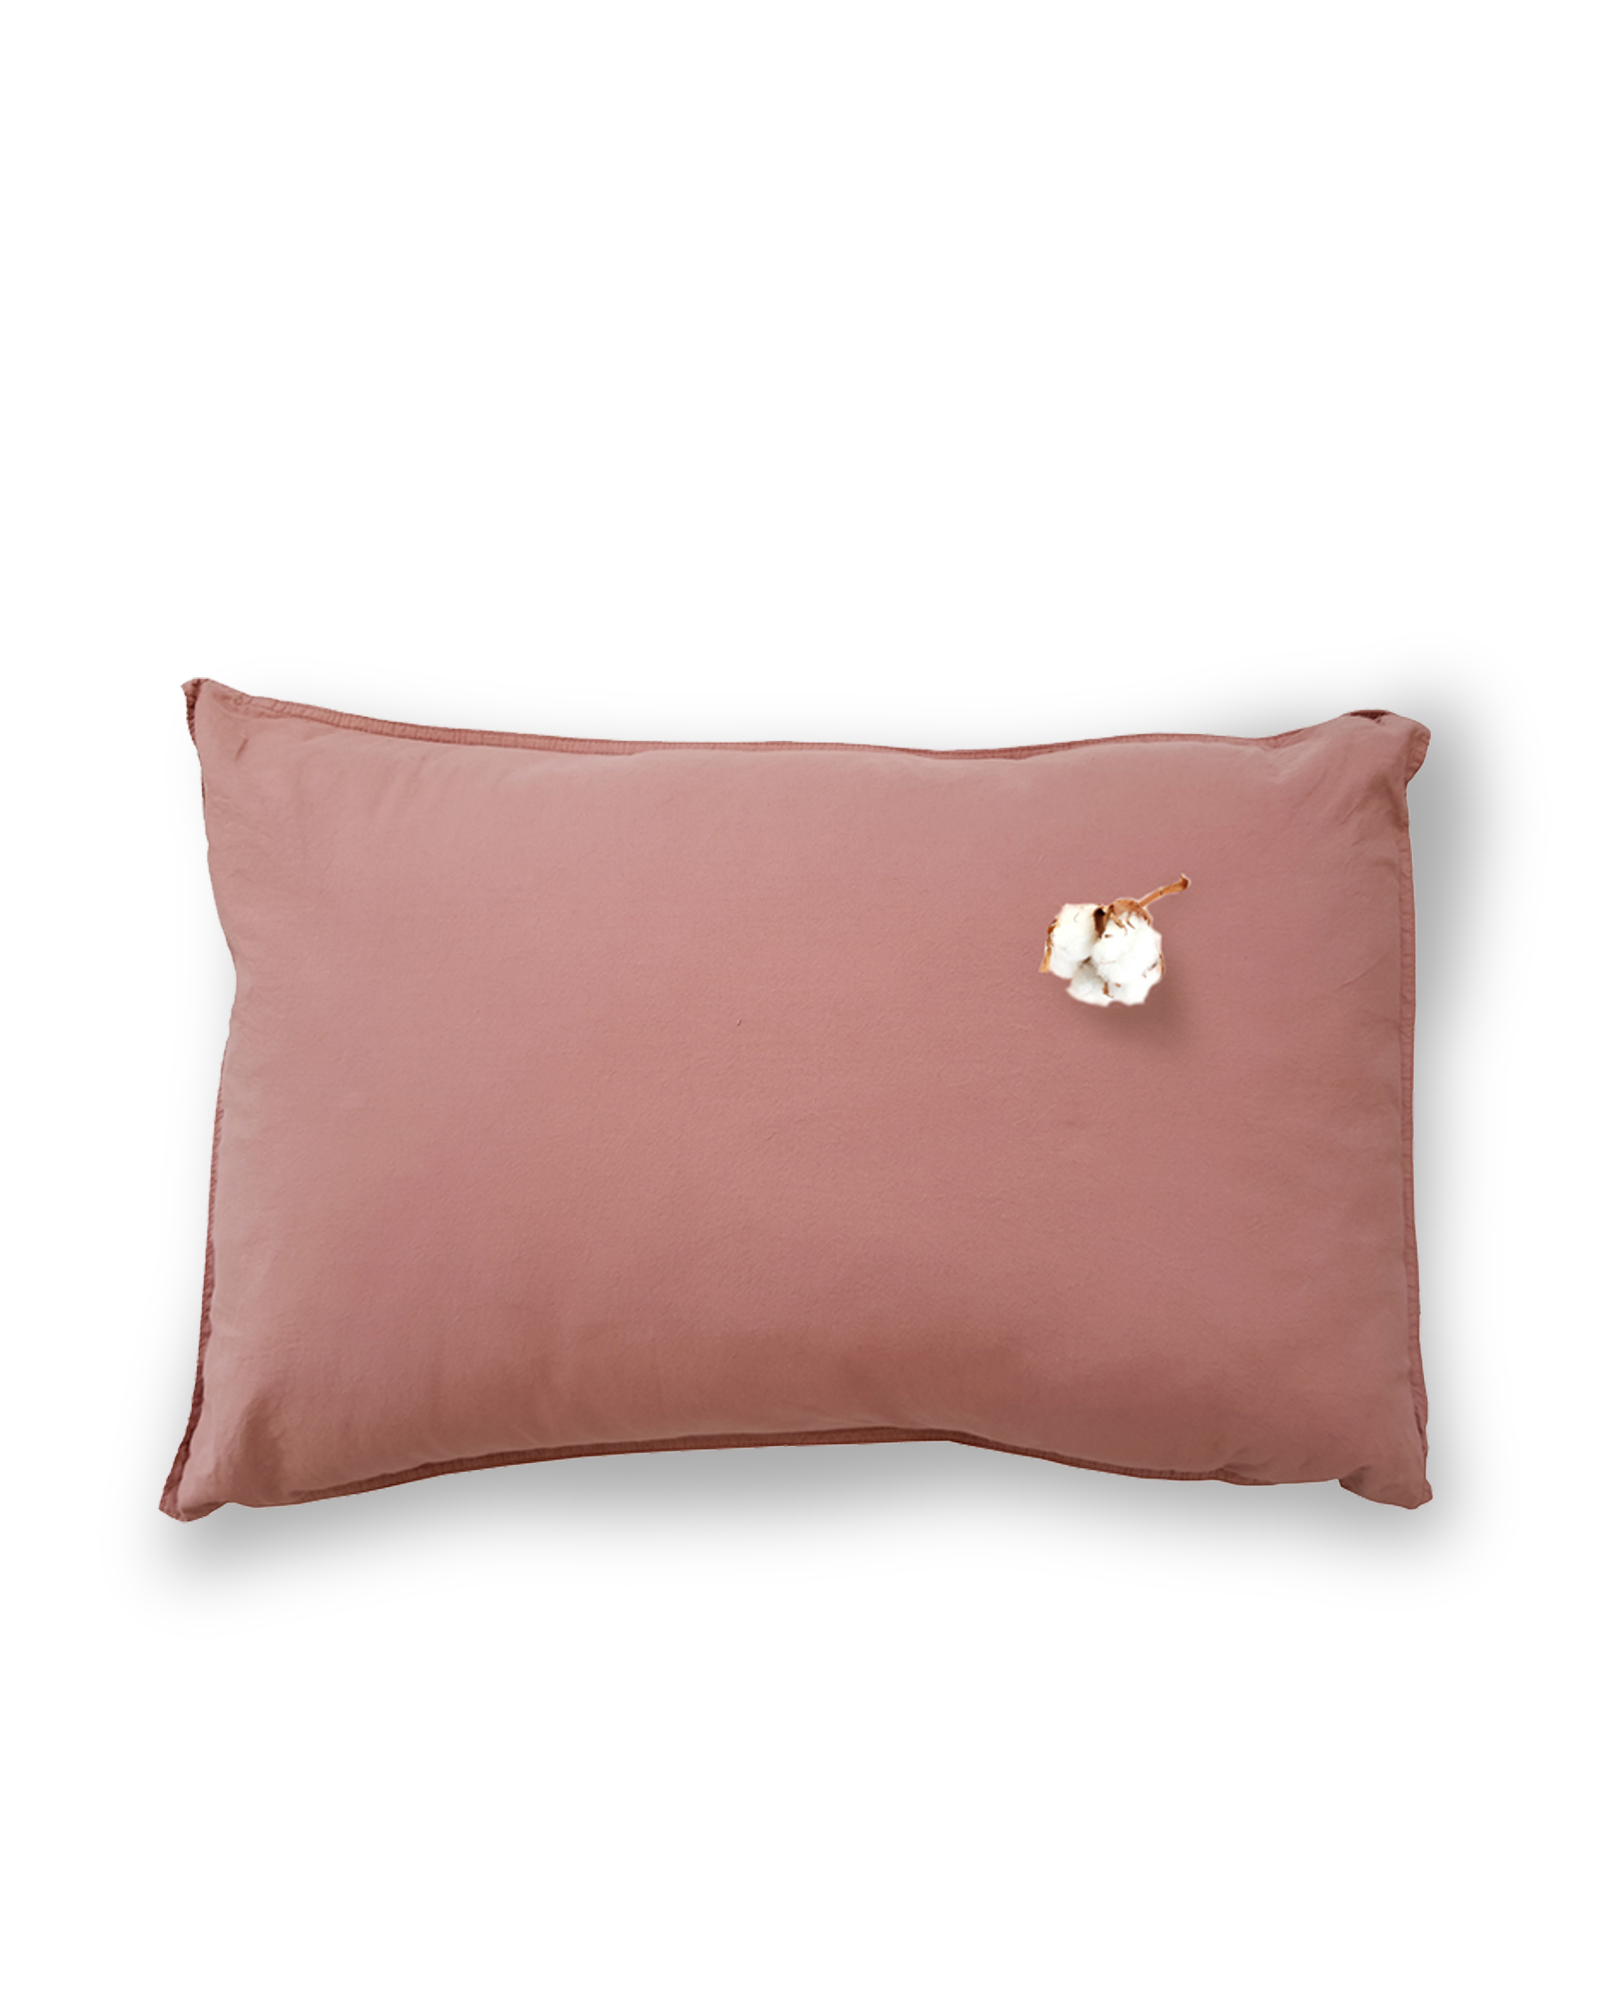 MARIE-MARIE - Cushion VINTAGE COTTON Rosewood - 40x60 cm - Rosewood